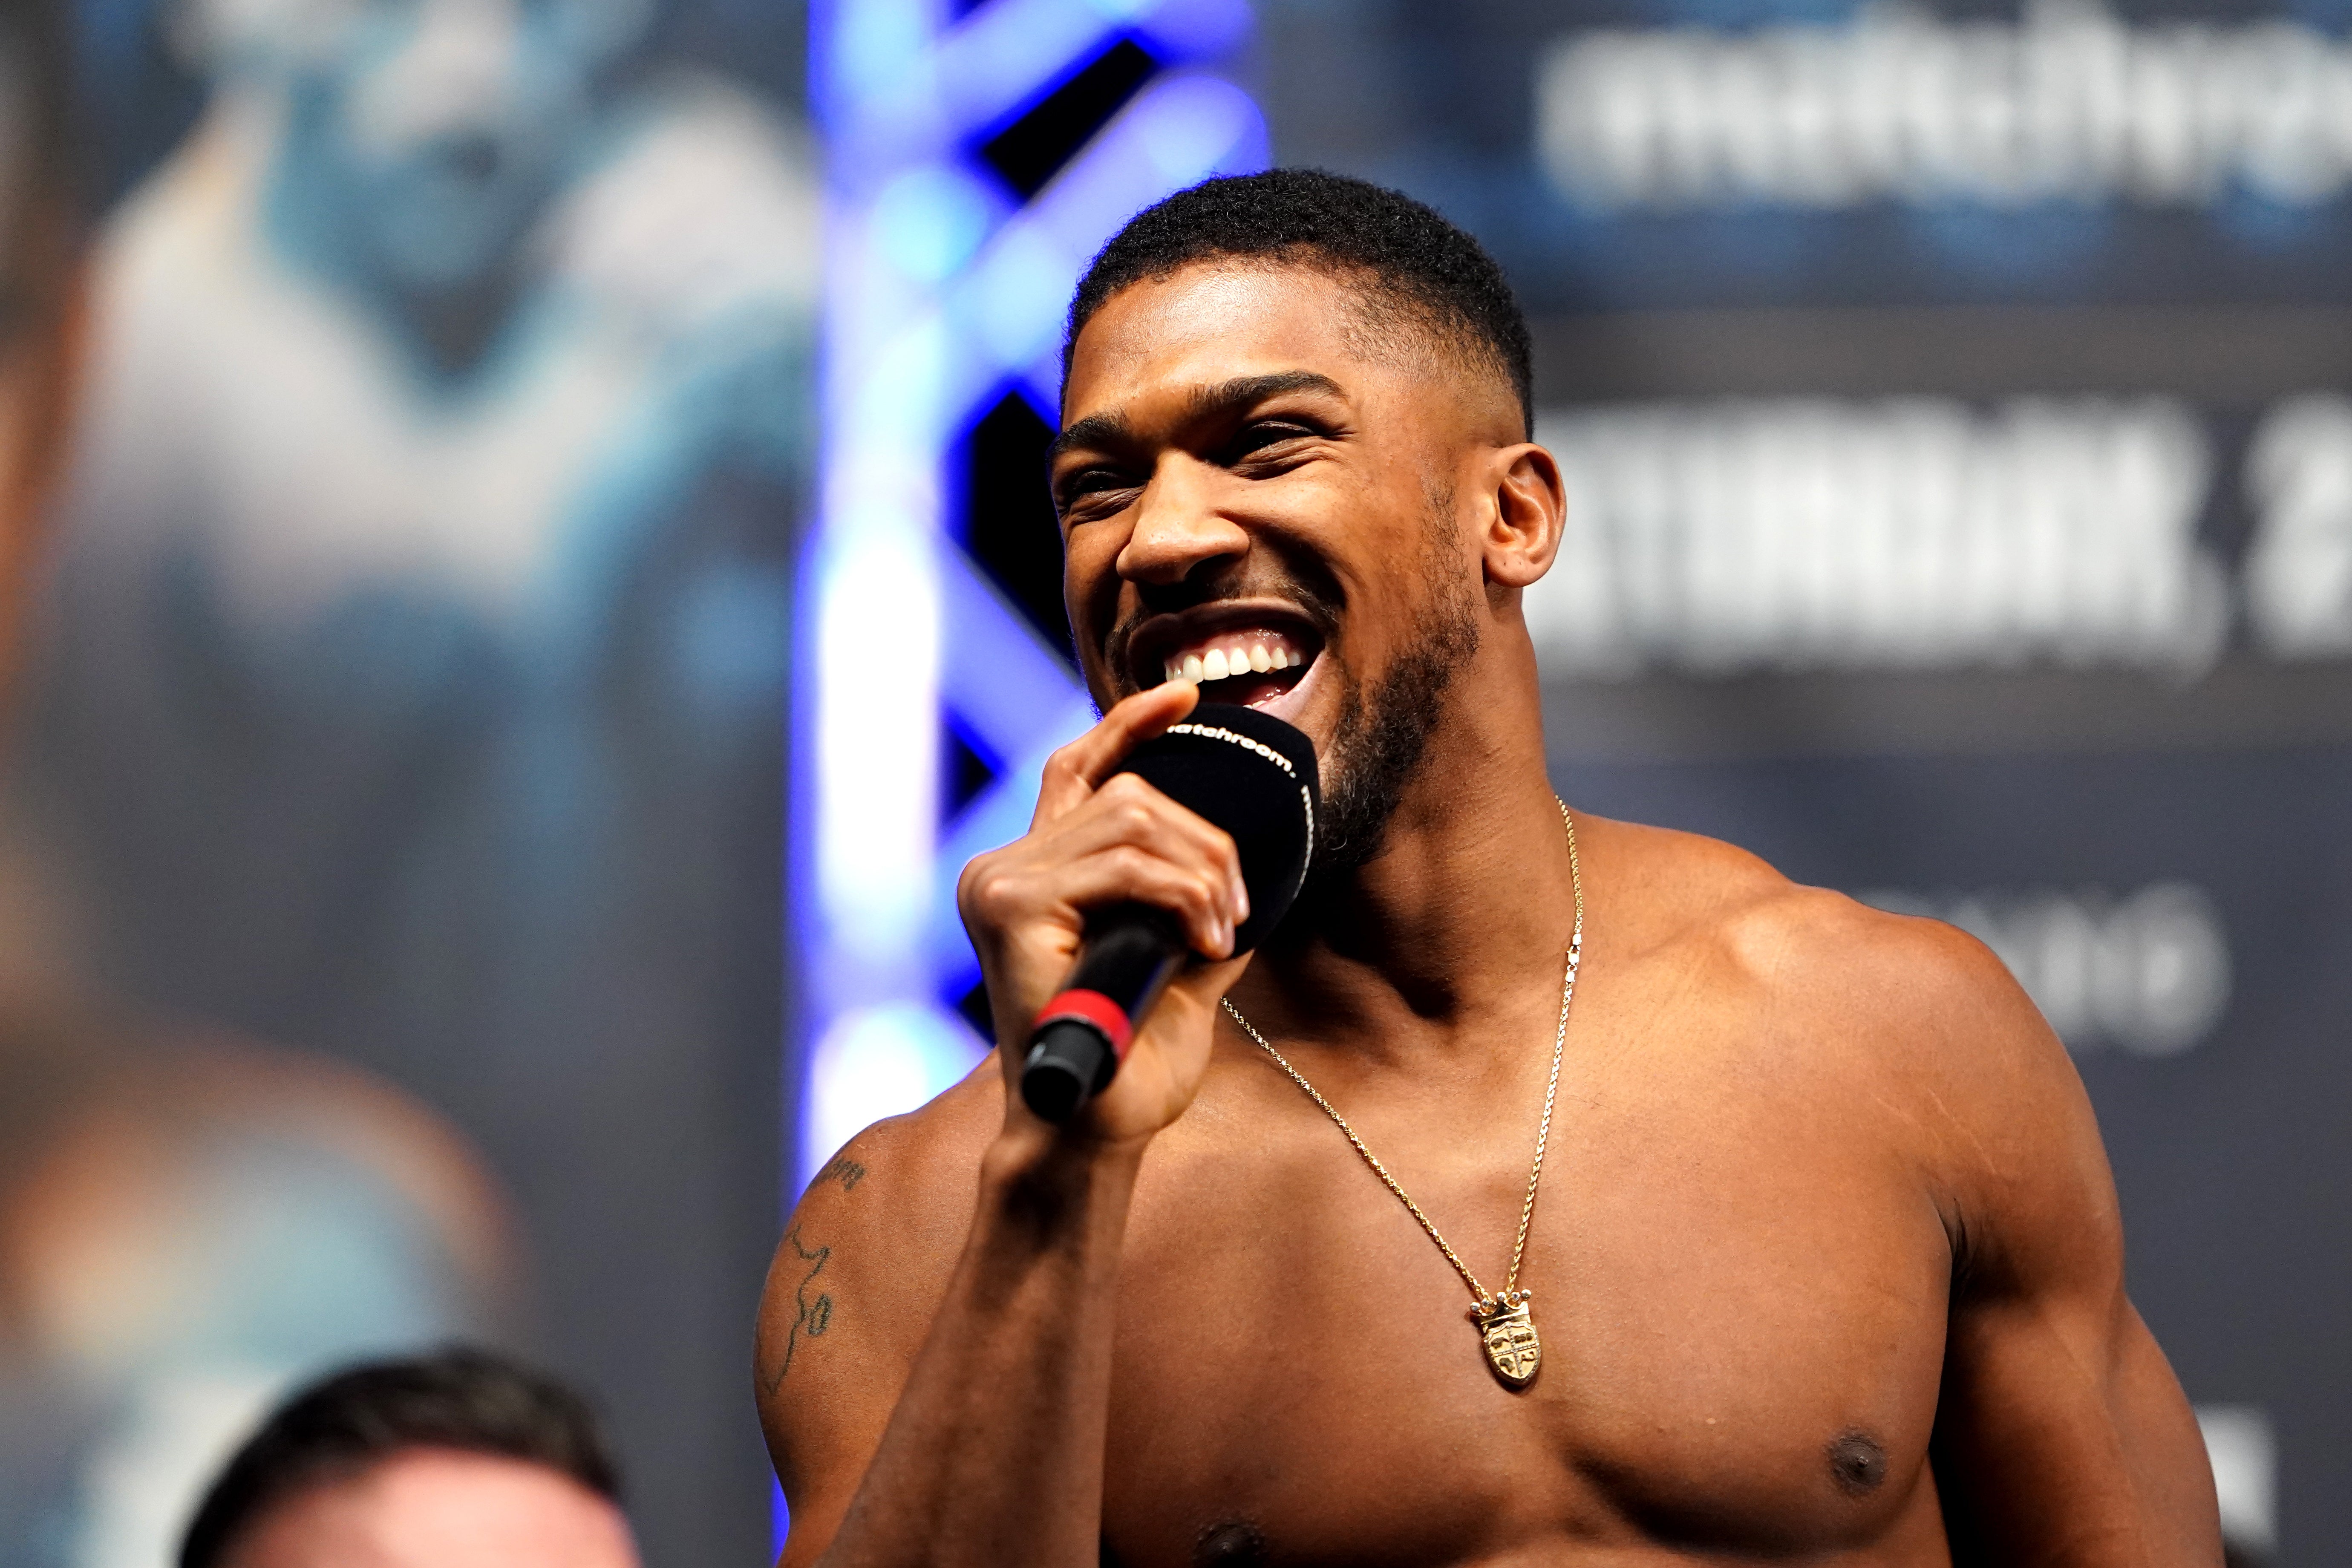 Anthony Joshua made a mockery of suggestions he had appeared leaner in recent weeks (Zac Goodwin/PA)